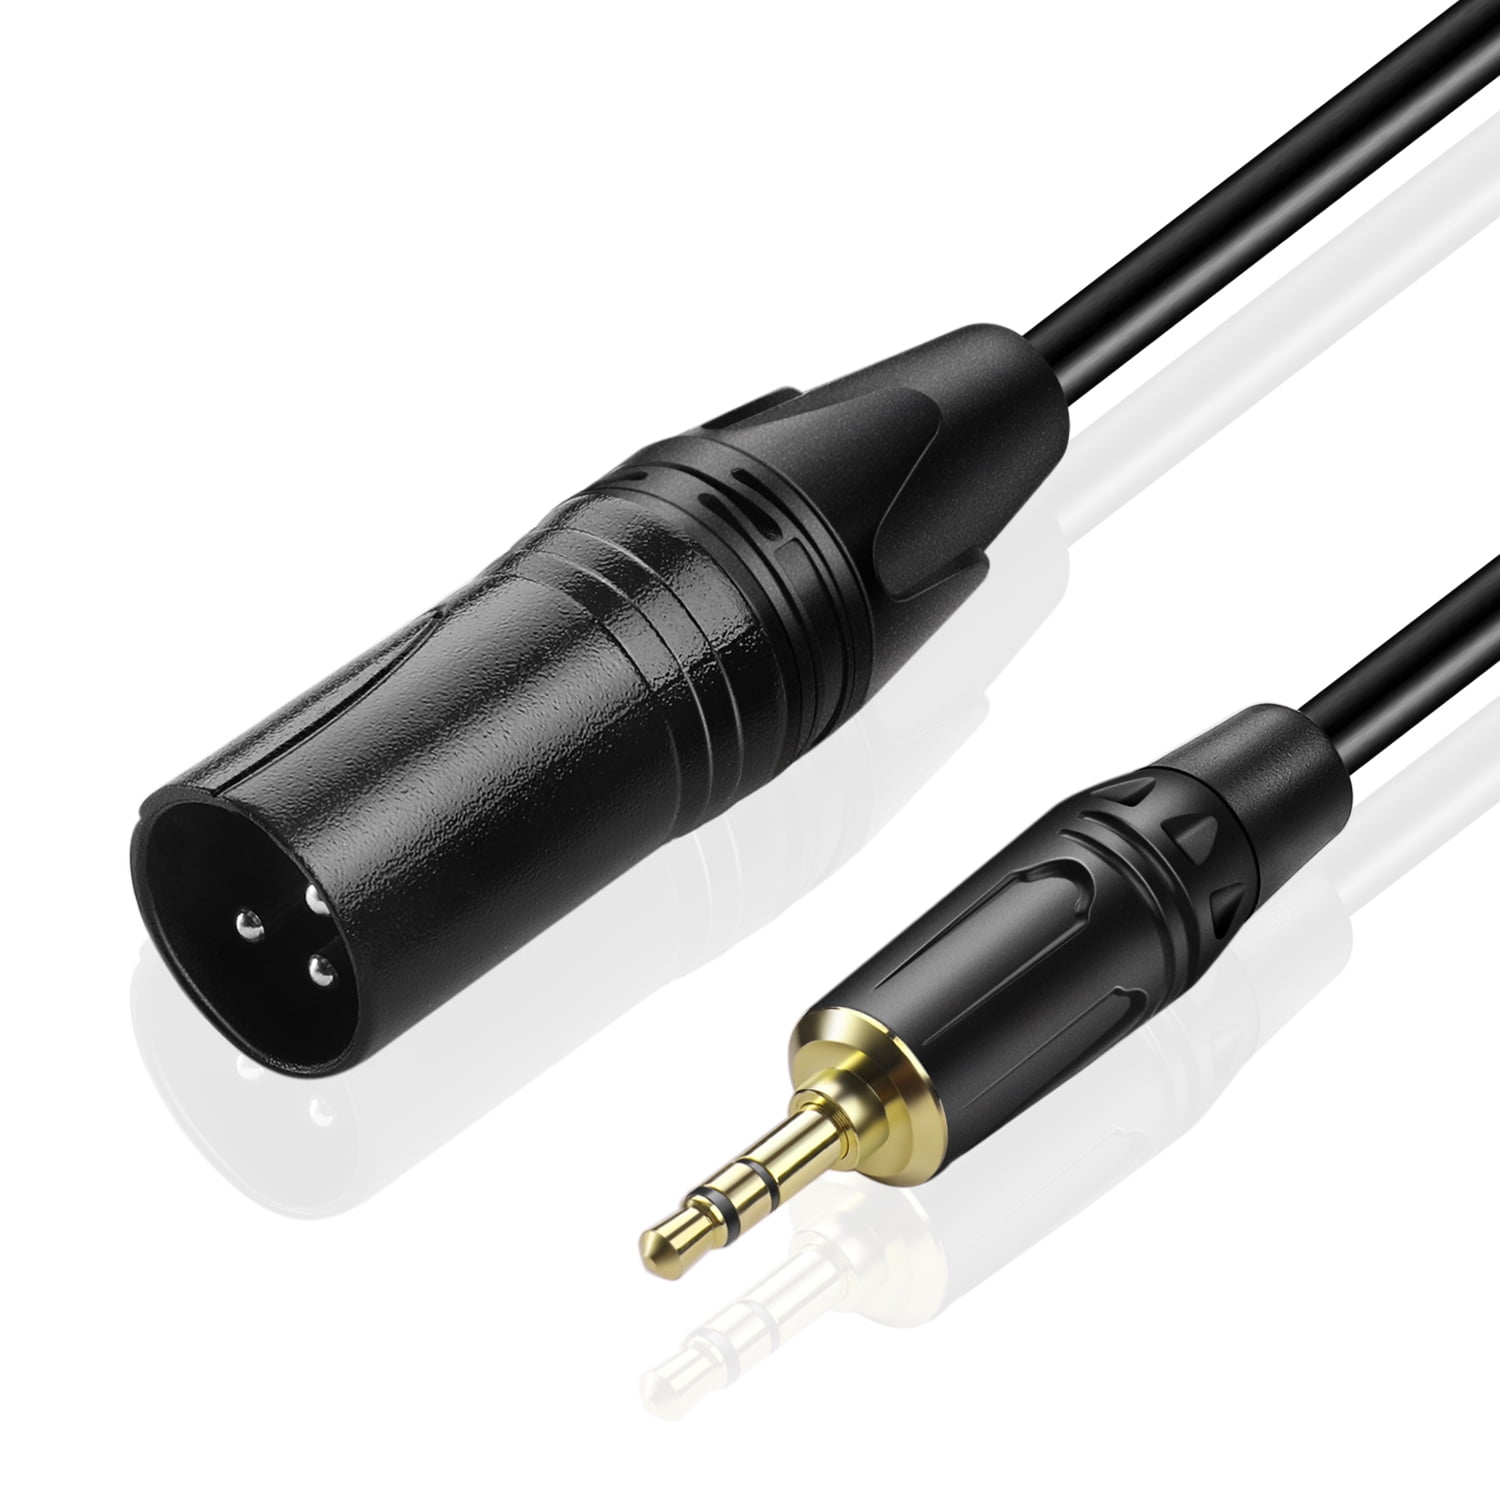 Unbalanced 3.5mm (1/8 Inch) TRS to XLR Male to Male Cable (3FT) Headphone  Audio Jack Plug Converter Wire Cord for Voice Recorder, Tablet, Laptop and  more - Walmart.com  Walmart